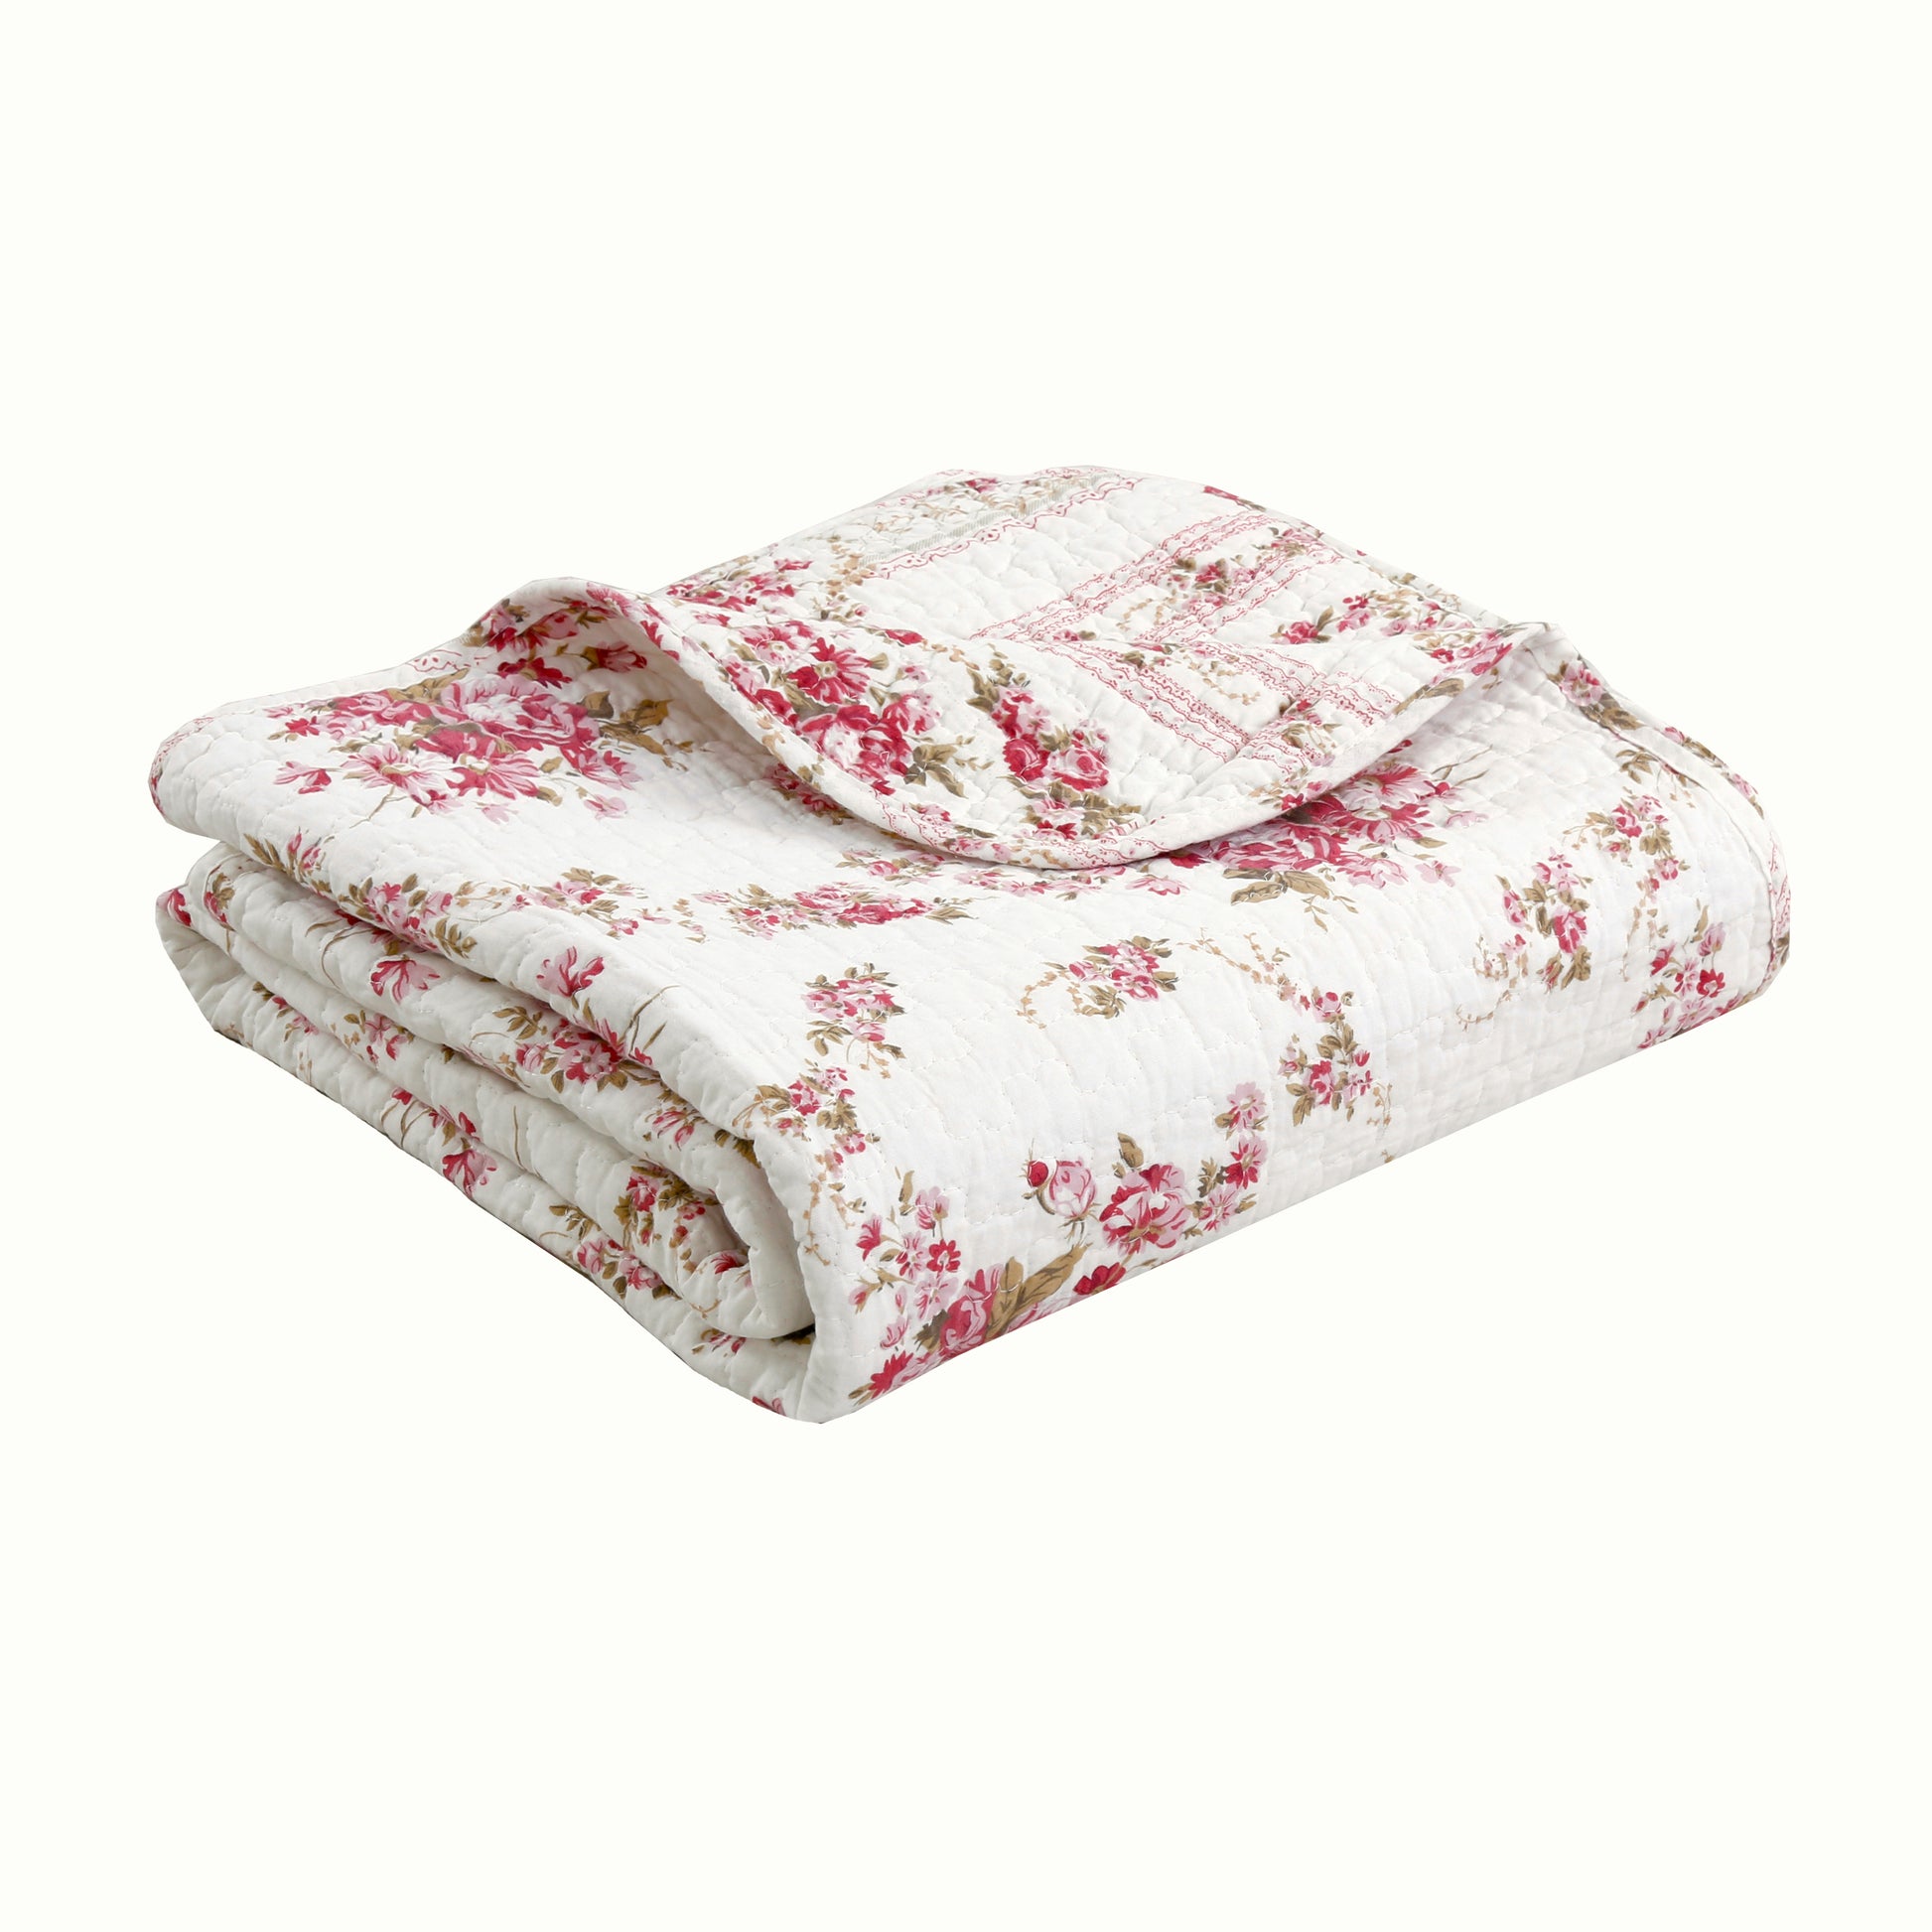 Cozy Line Home Fashions Soft Subtle Ditsy Rose Floral Garden 3-Piece Pink  Cream Scalloped Shabby Chic Cotton Queen Quilt Bedding Set BB01005239Q -  The Home Depot